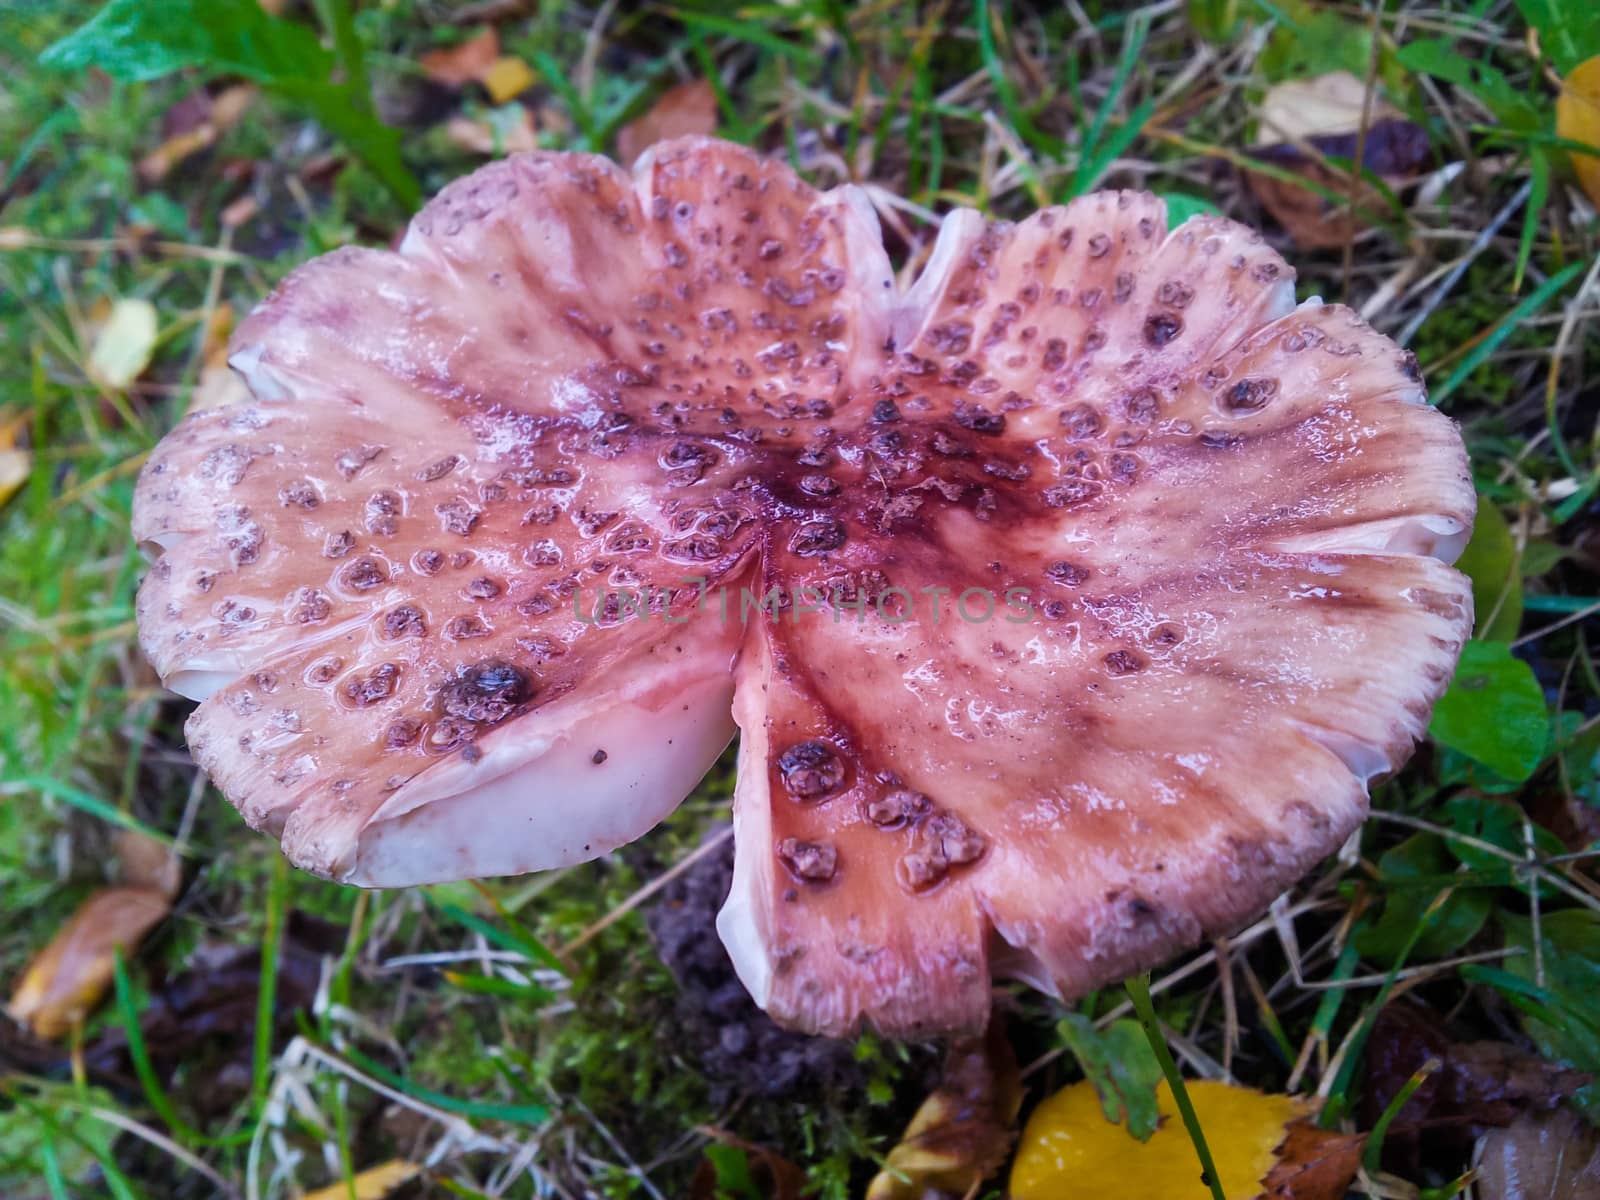 Fly agaric mushroom, caugth in the rain, carrying a wet hat